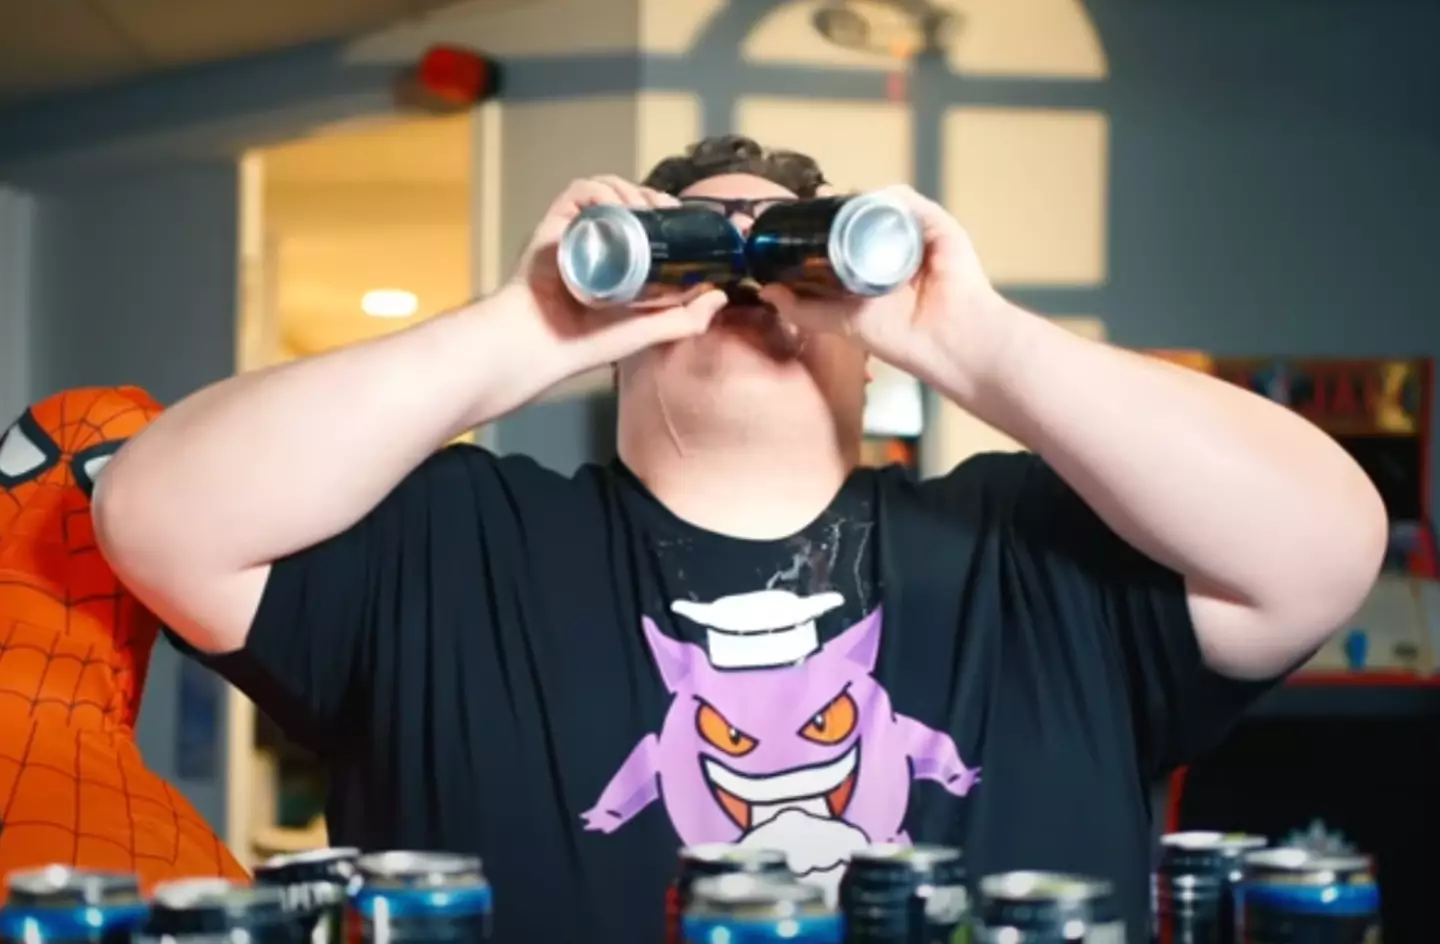 The 36-year-old chugged 12 drinks in 10 minutes.